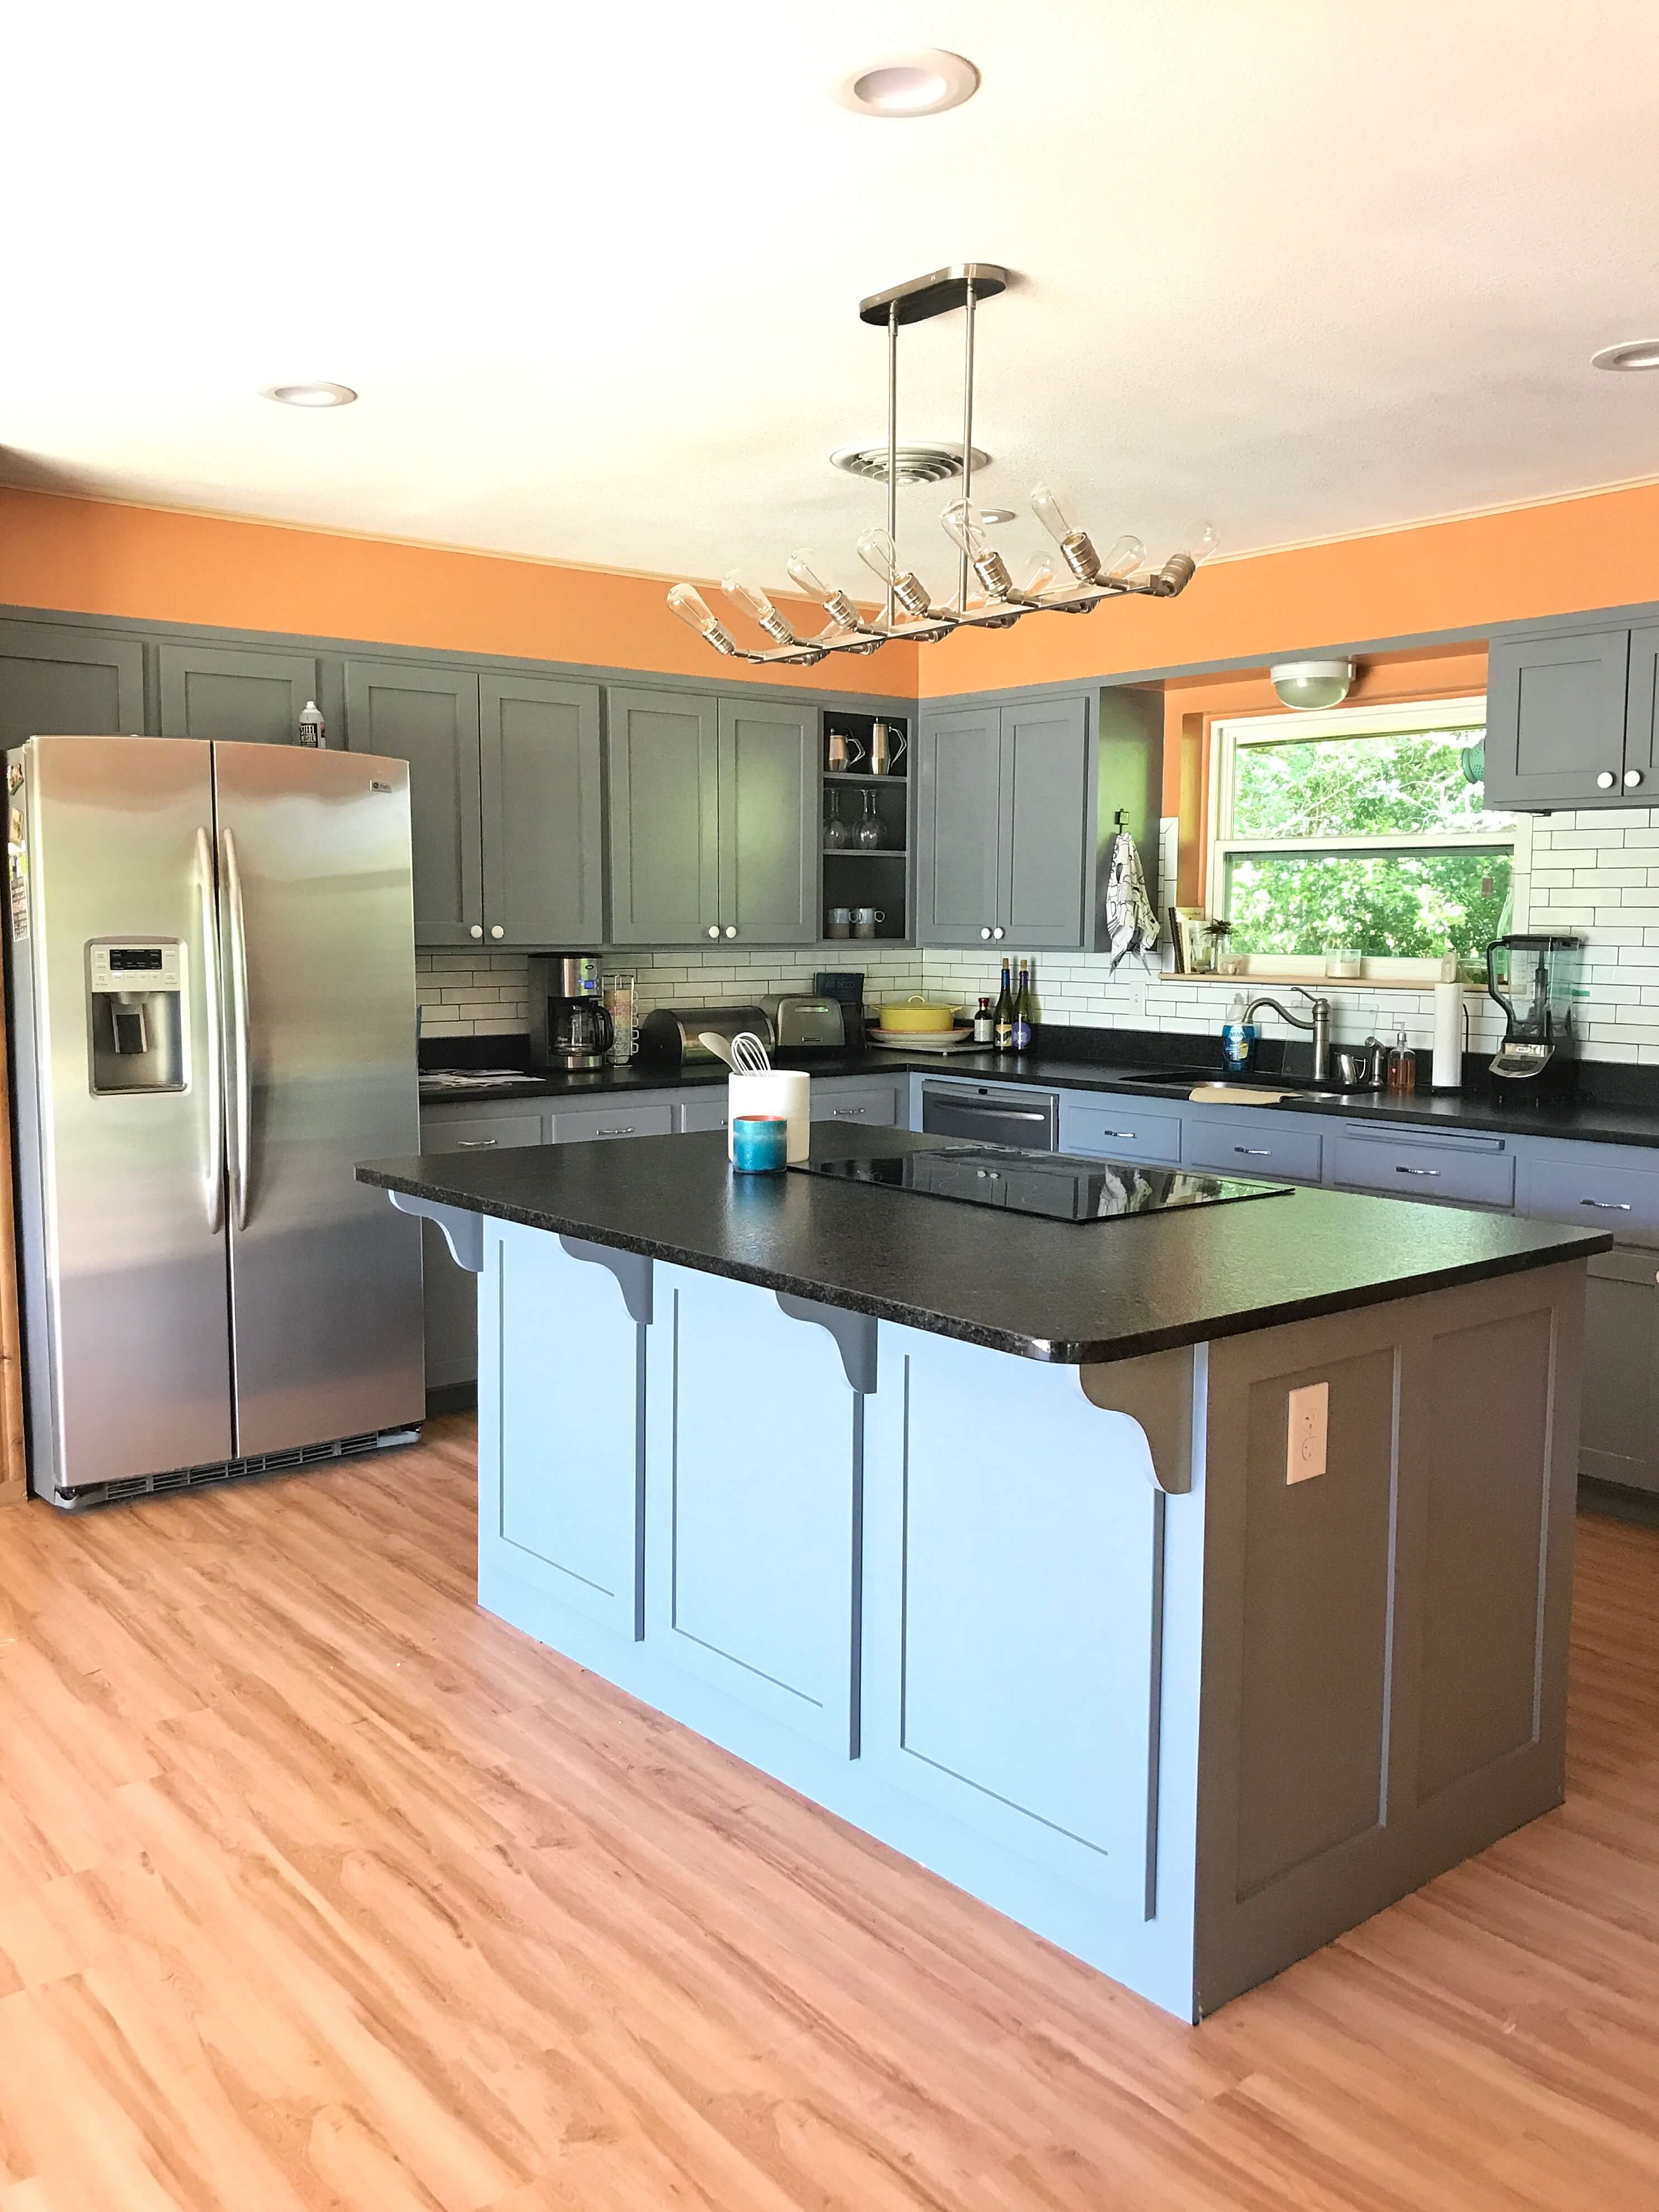 Kitchen Design Remodeling in Waco, TX